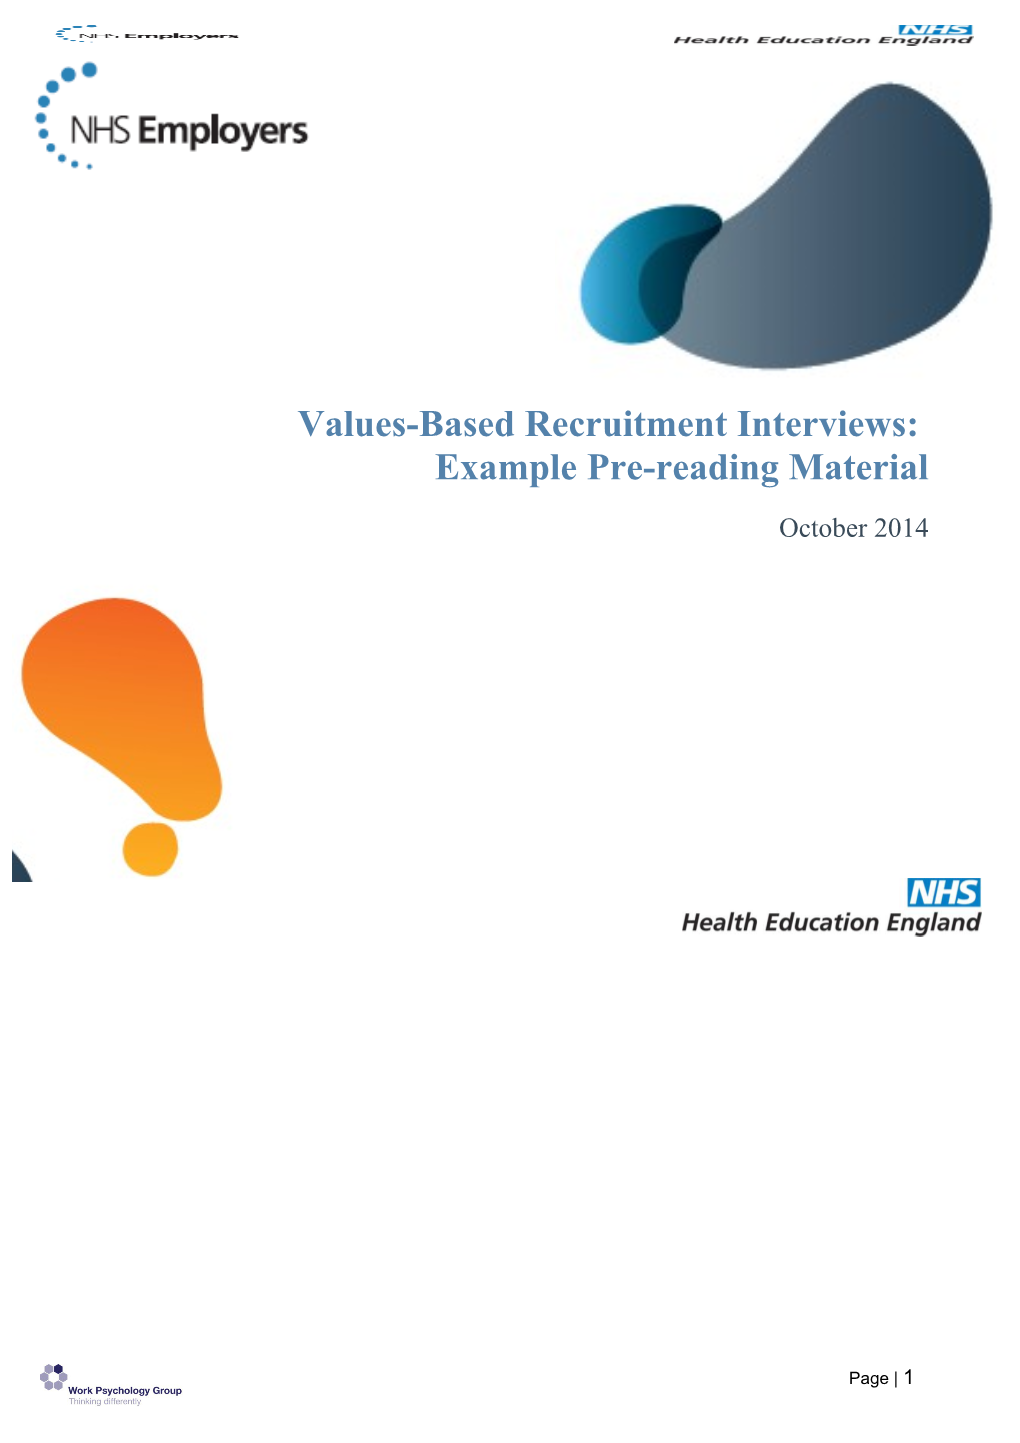 Values-Based Recruitment Interviews